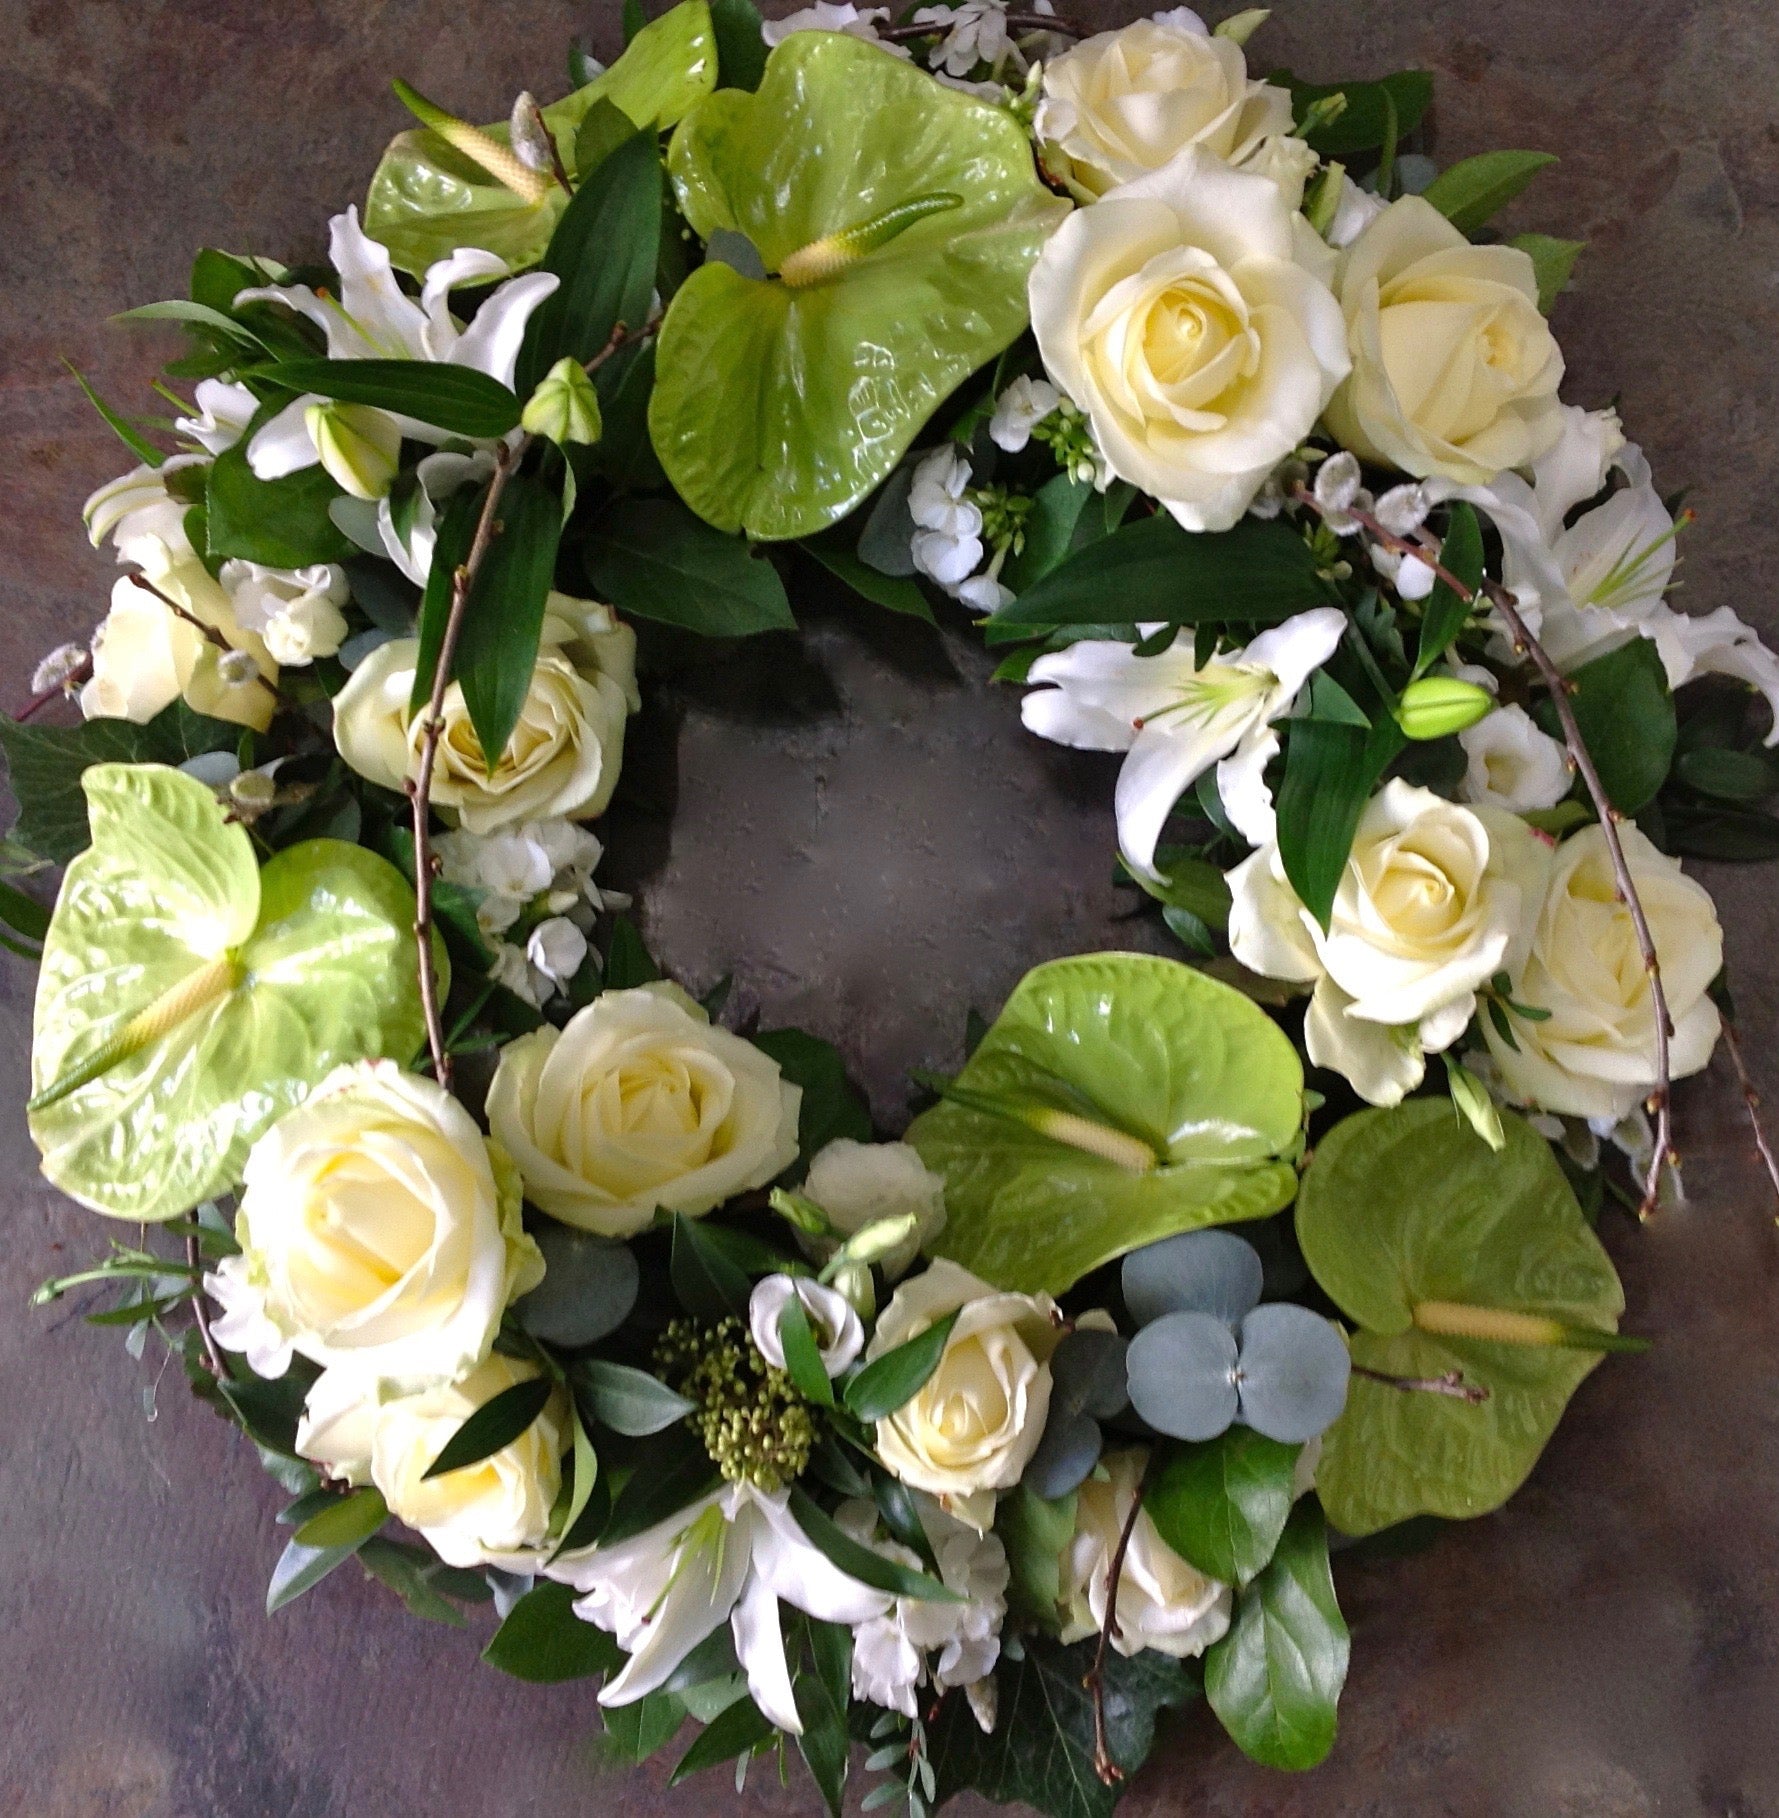 Roses, anthurium and lilies funeral wreath